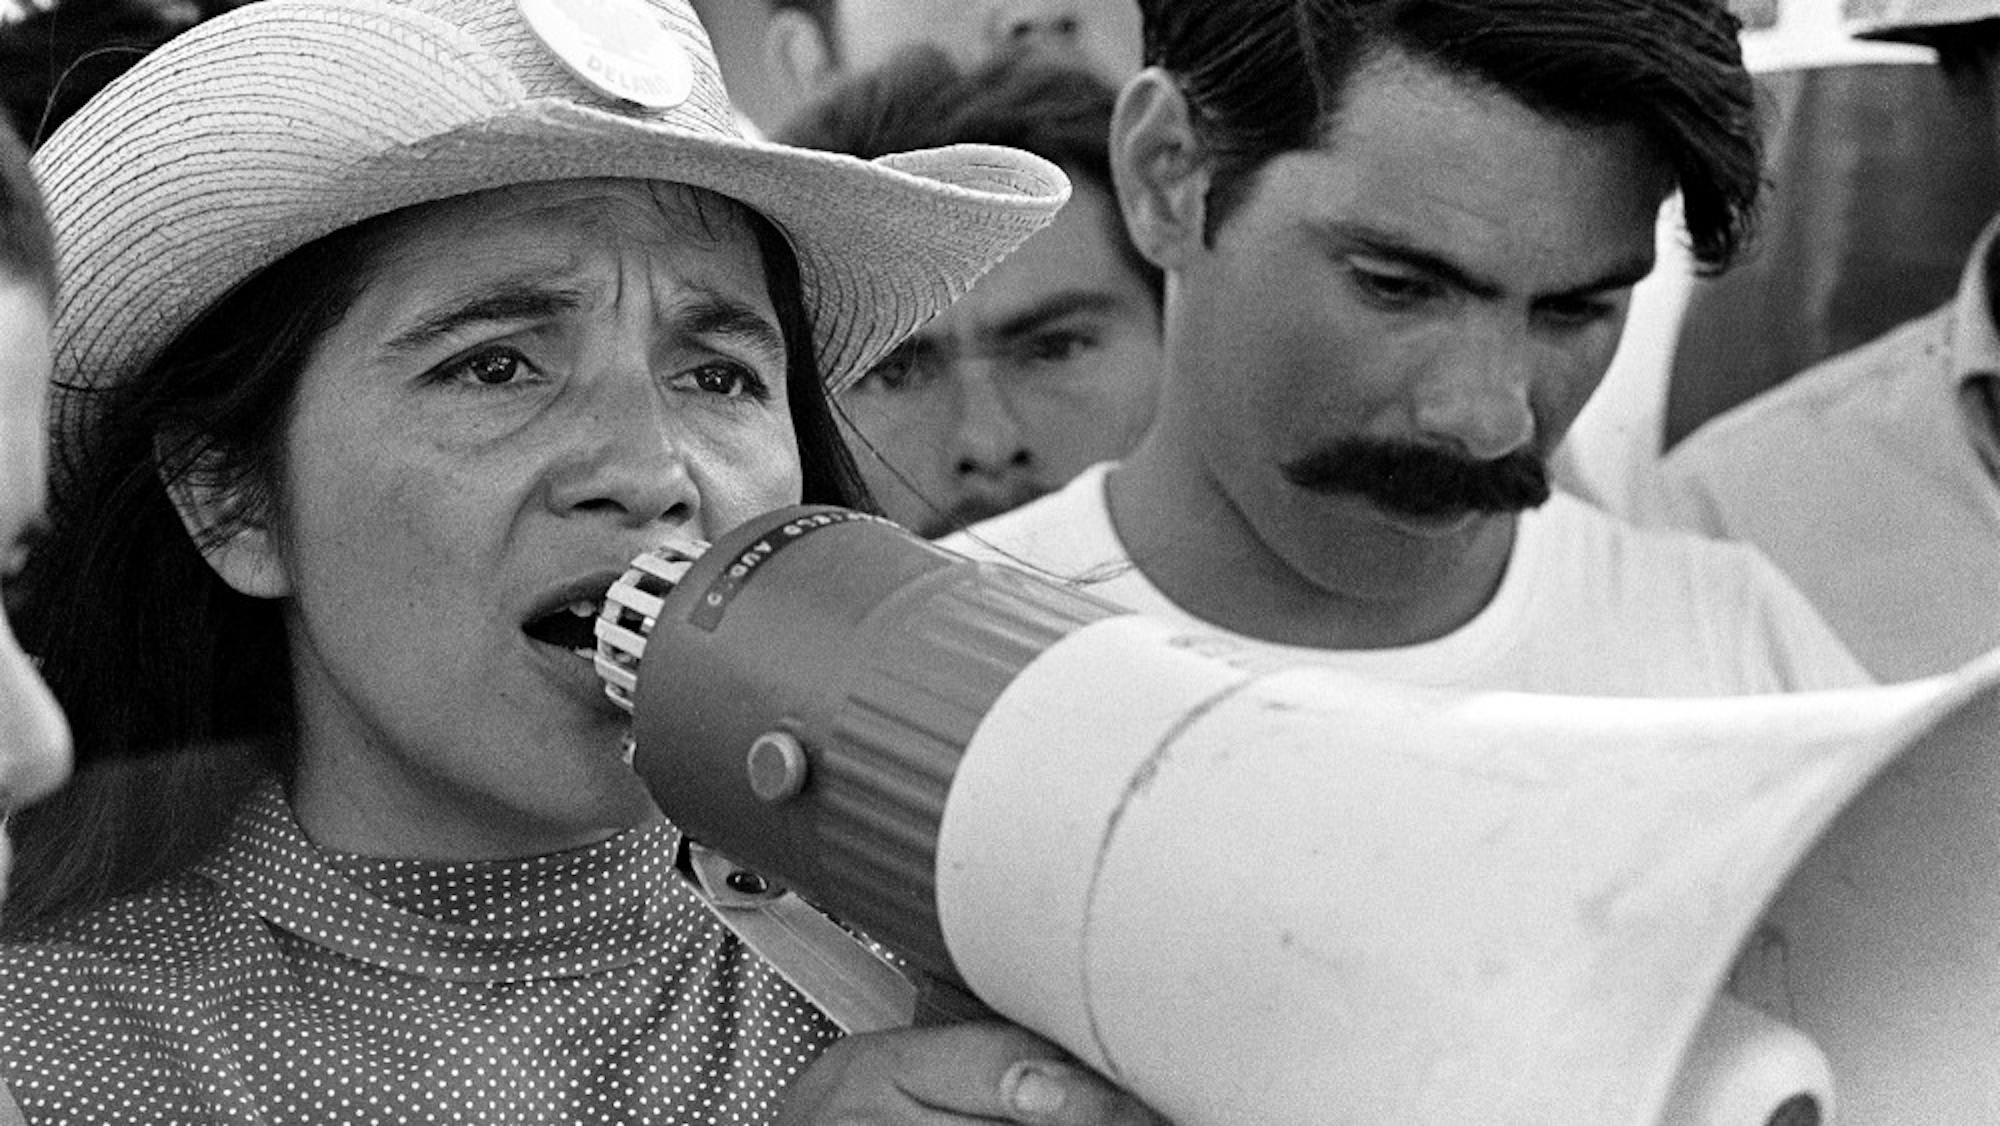 1-United-Farm-Workers-leader-Dolores-Huerta-organizing-marchers-on-the-2nd-day-of-March-Coachella-in-Coachella-CA-1969.-©-1976-George-Ballis-Take-Stock-The-Image-Works